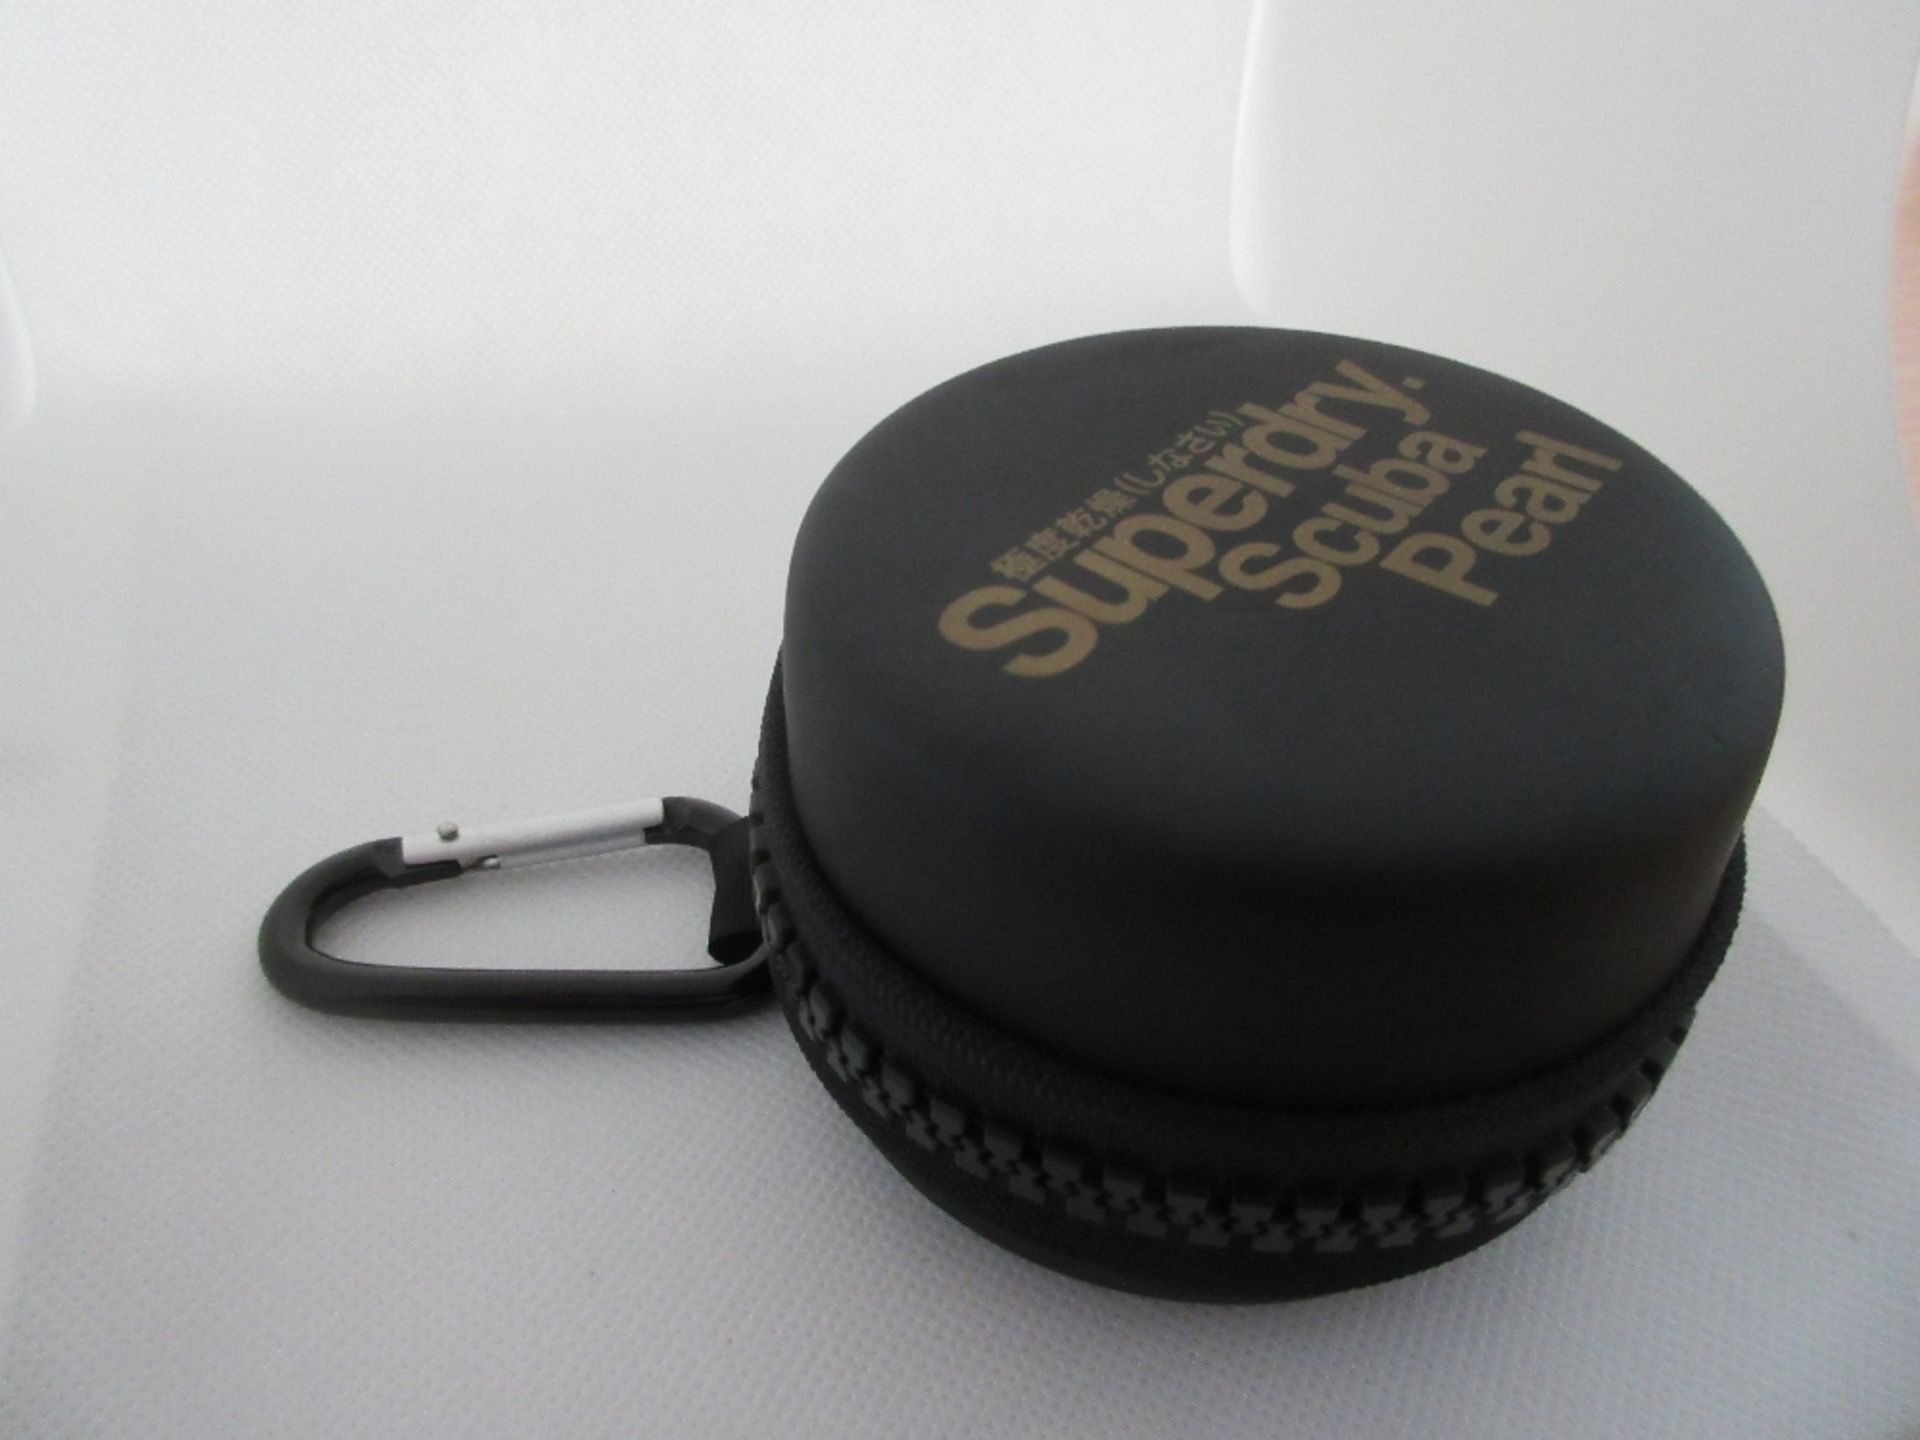 SUPERDRY MALE WATCH, MODEL SYG111W, CASE DIAMETER 45MM, RUBBER STRAP, BOXED, RRP £ 79.99 - Image 4 of 4